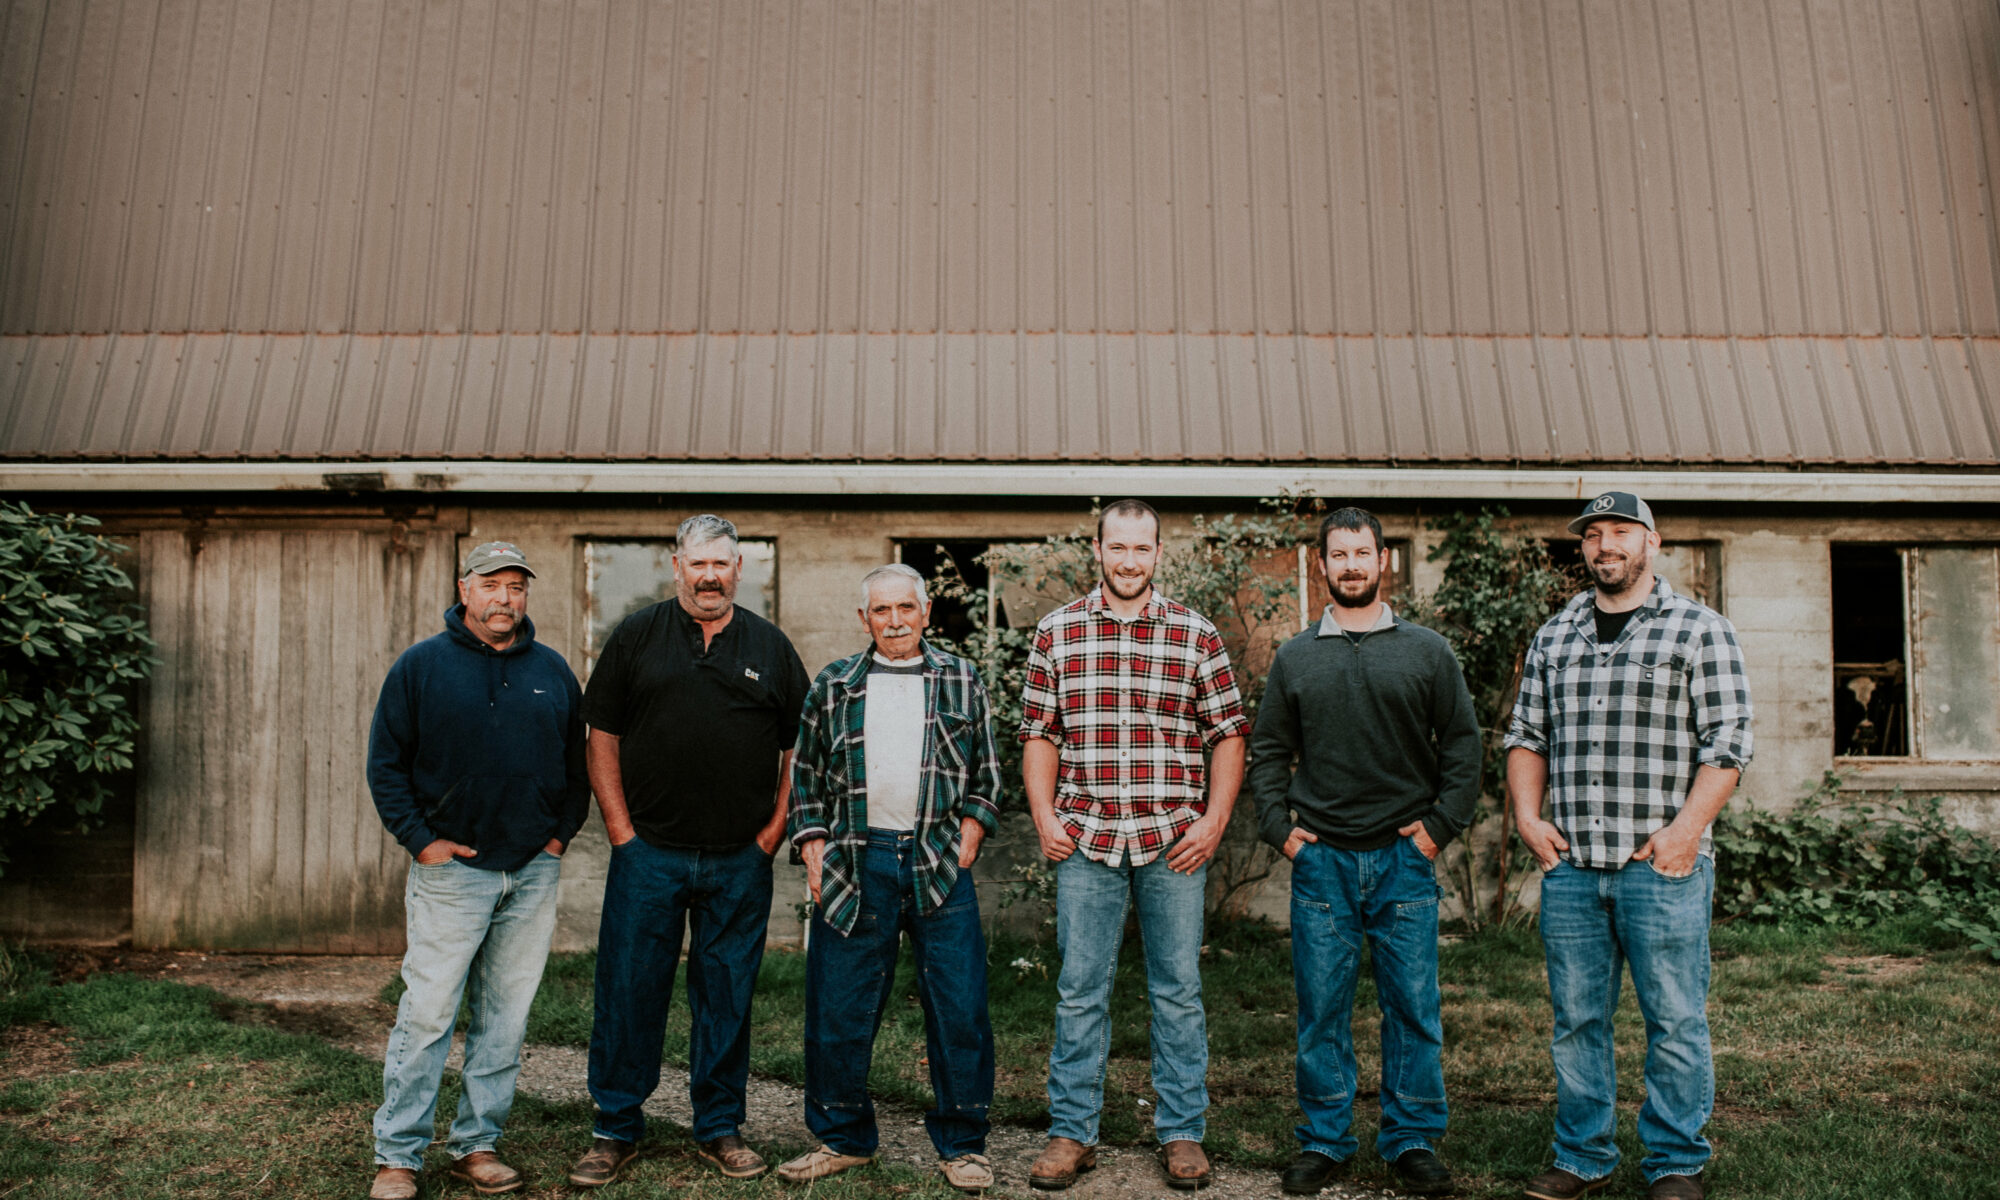 Generations of farmers holding the family tradition.